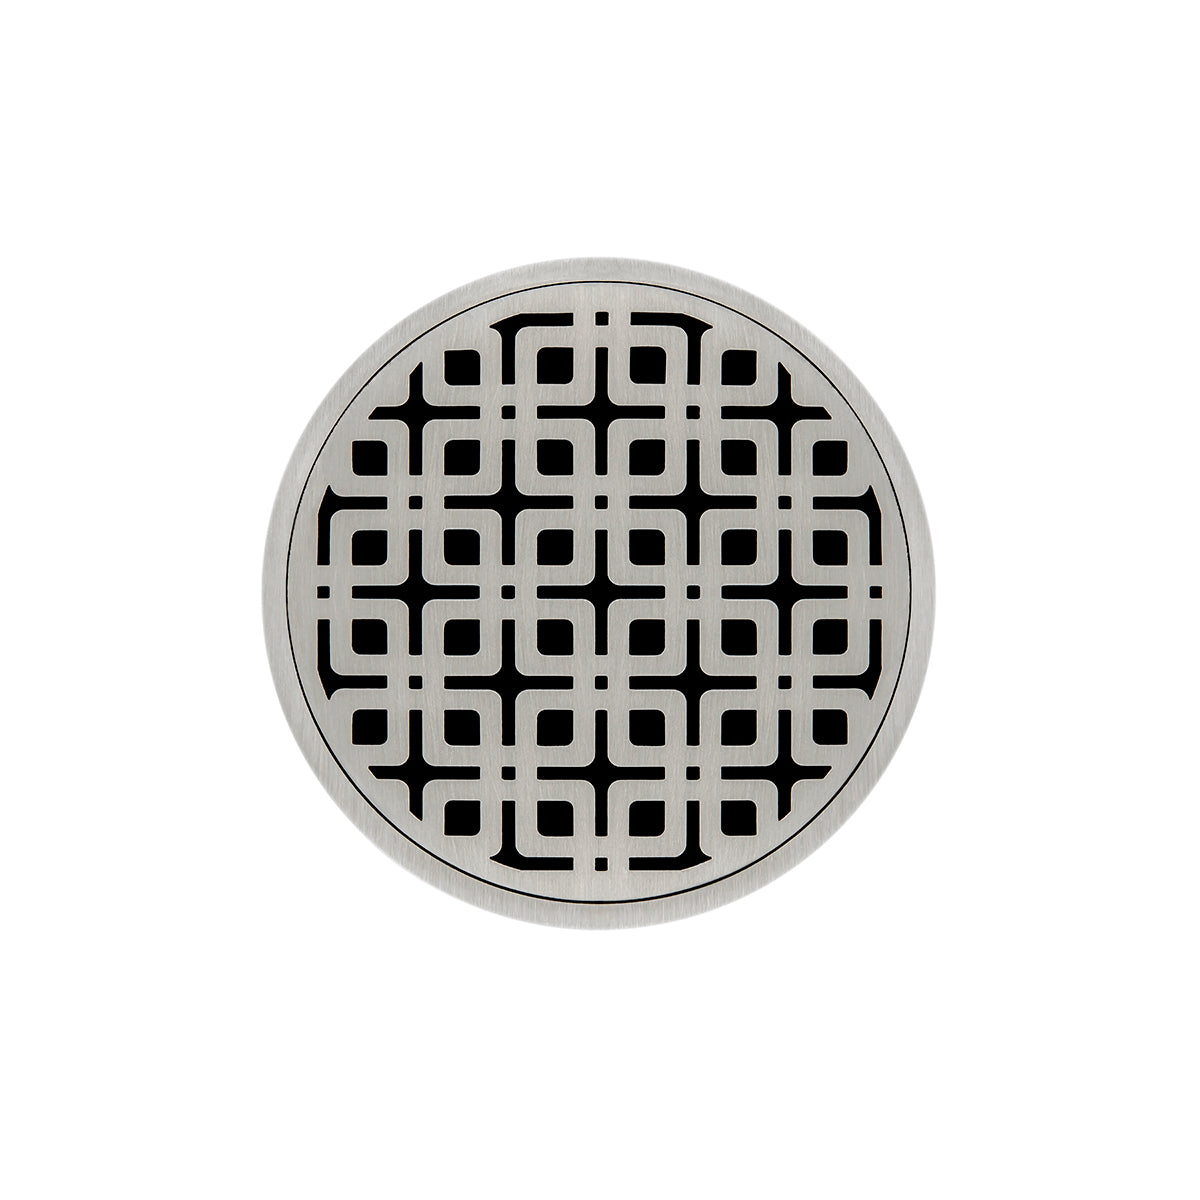 Infinity Drain 5" Round RKD 5 Premium Center Drain Kit with Link Pattern Decorative Plate with Cast Iron Drain Body, 2" Outlet